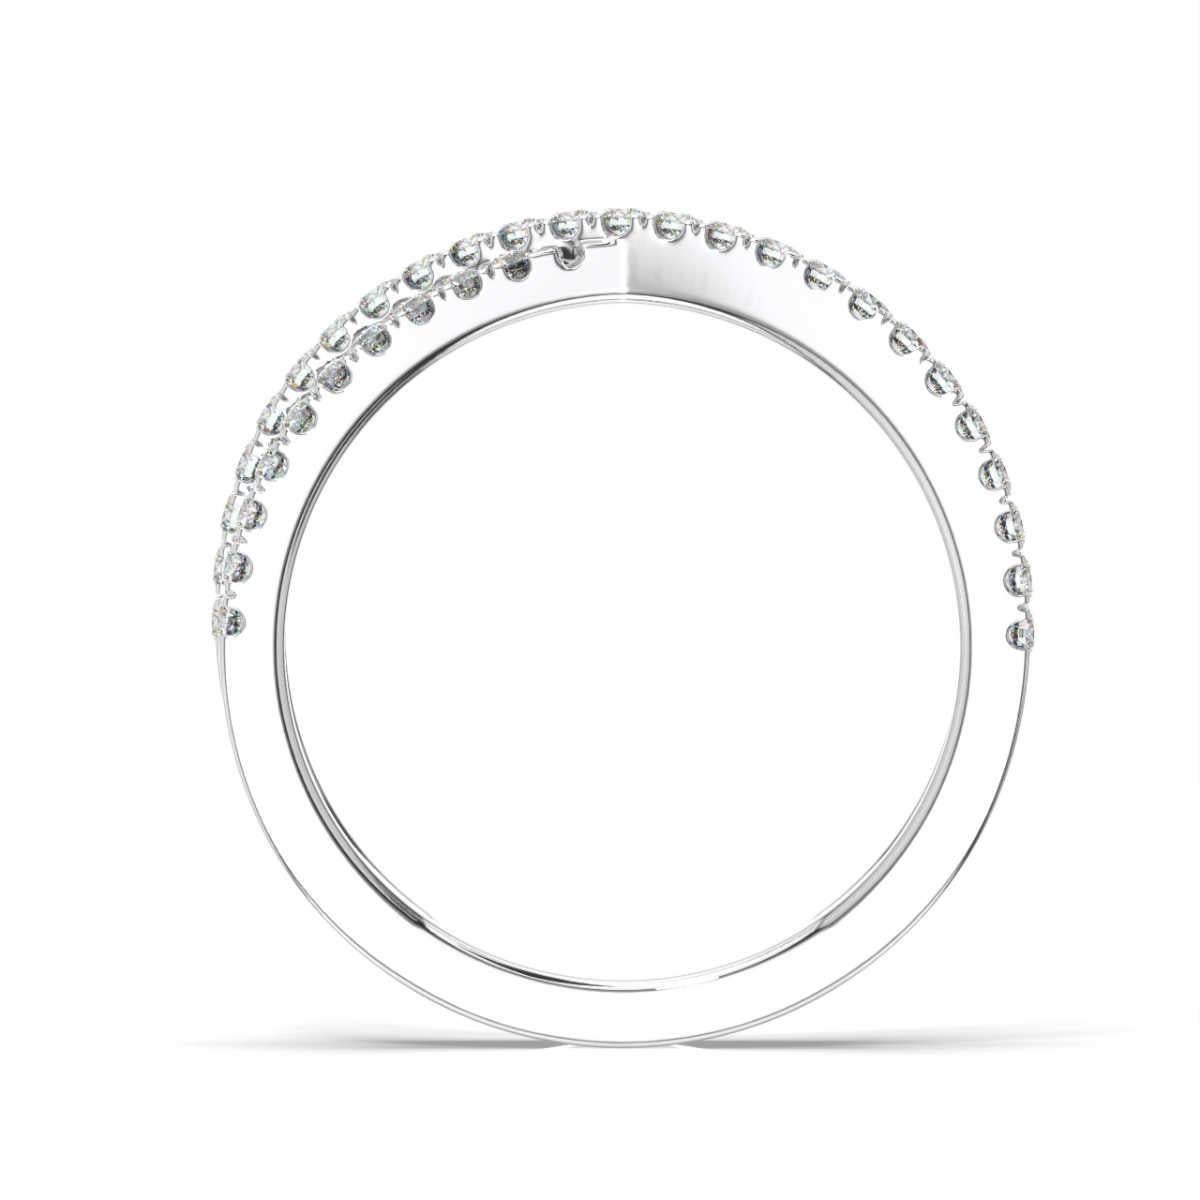 Two petite bands of micro prong set diamonds to wrap interweave each other in this contemporary ring.

Product details: 

Center Gemstone Color: WHITE
Side Gemstone Type: NATURAL DIAMOND
Side Gemstone Shape: ROUND
Metal: 18K White Gold
Metal Weight: